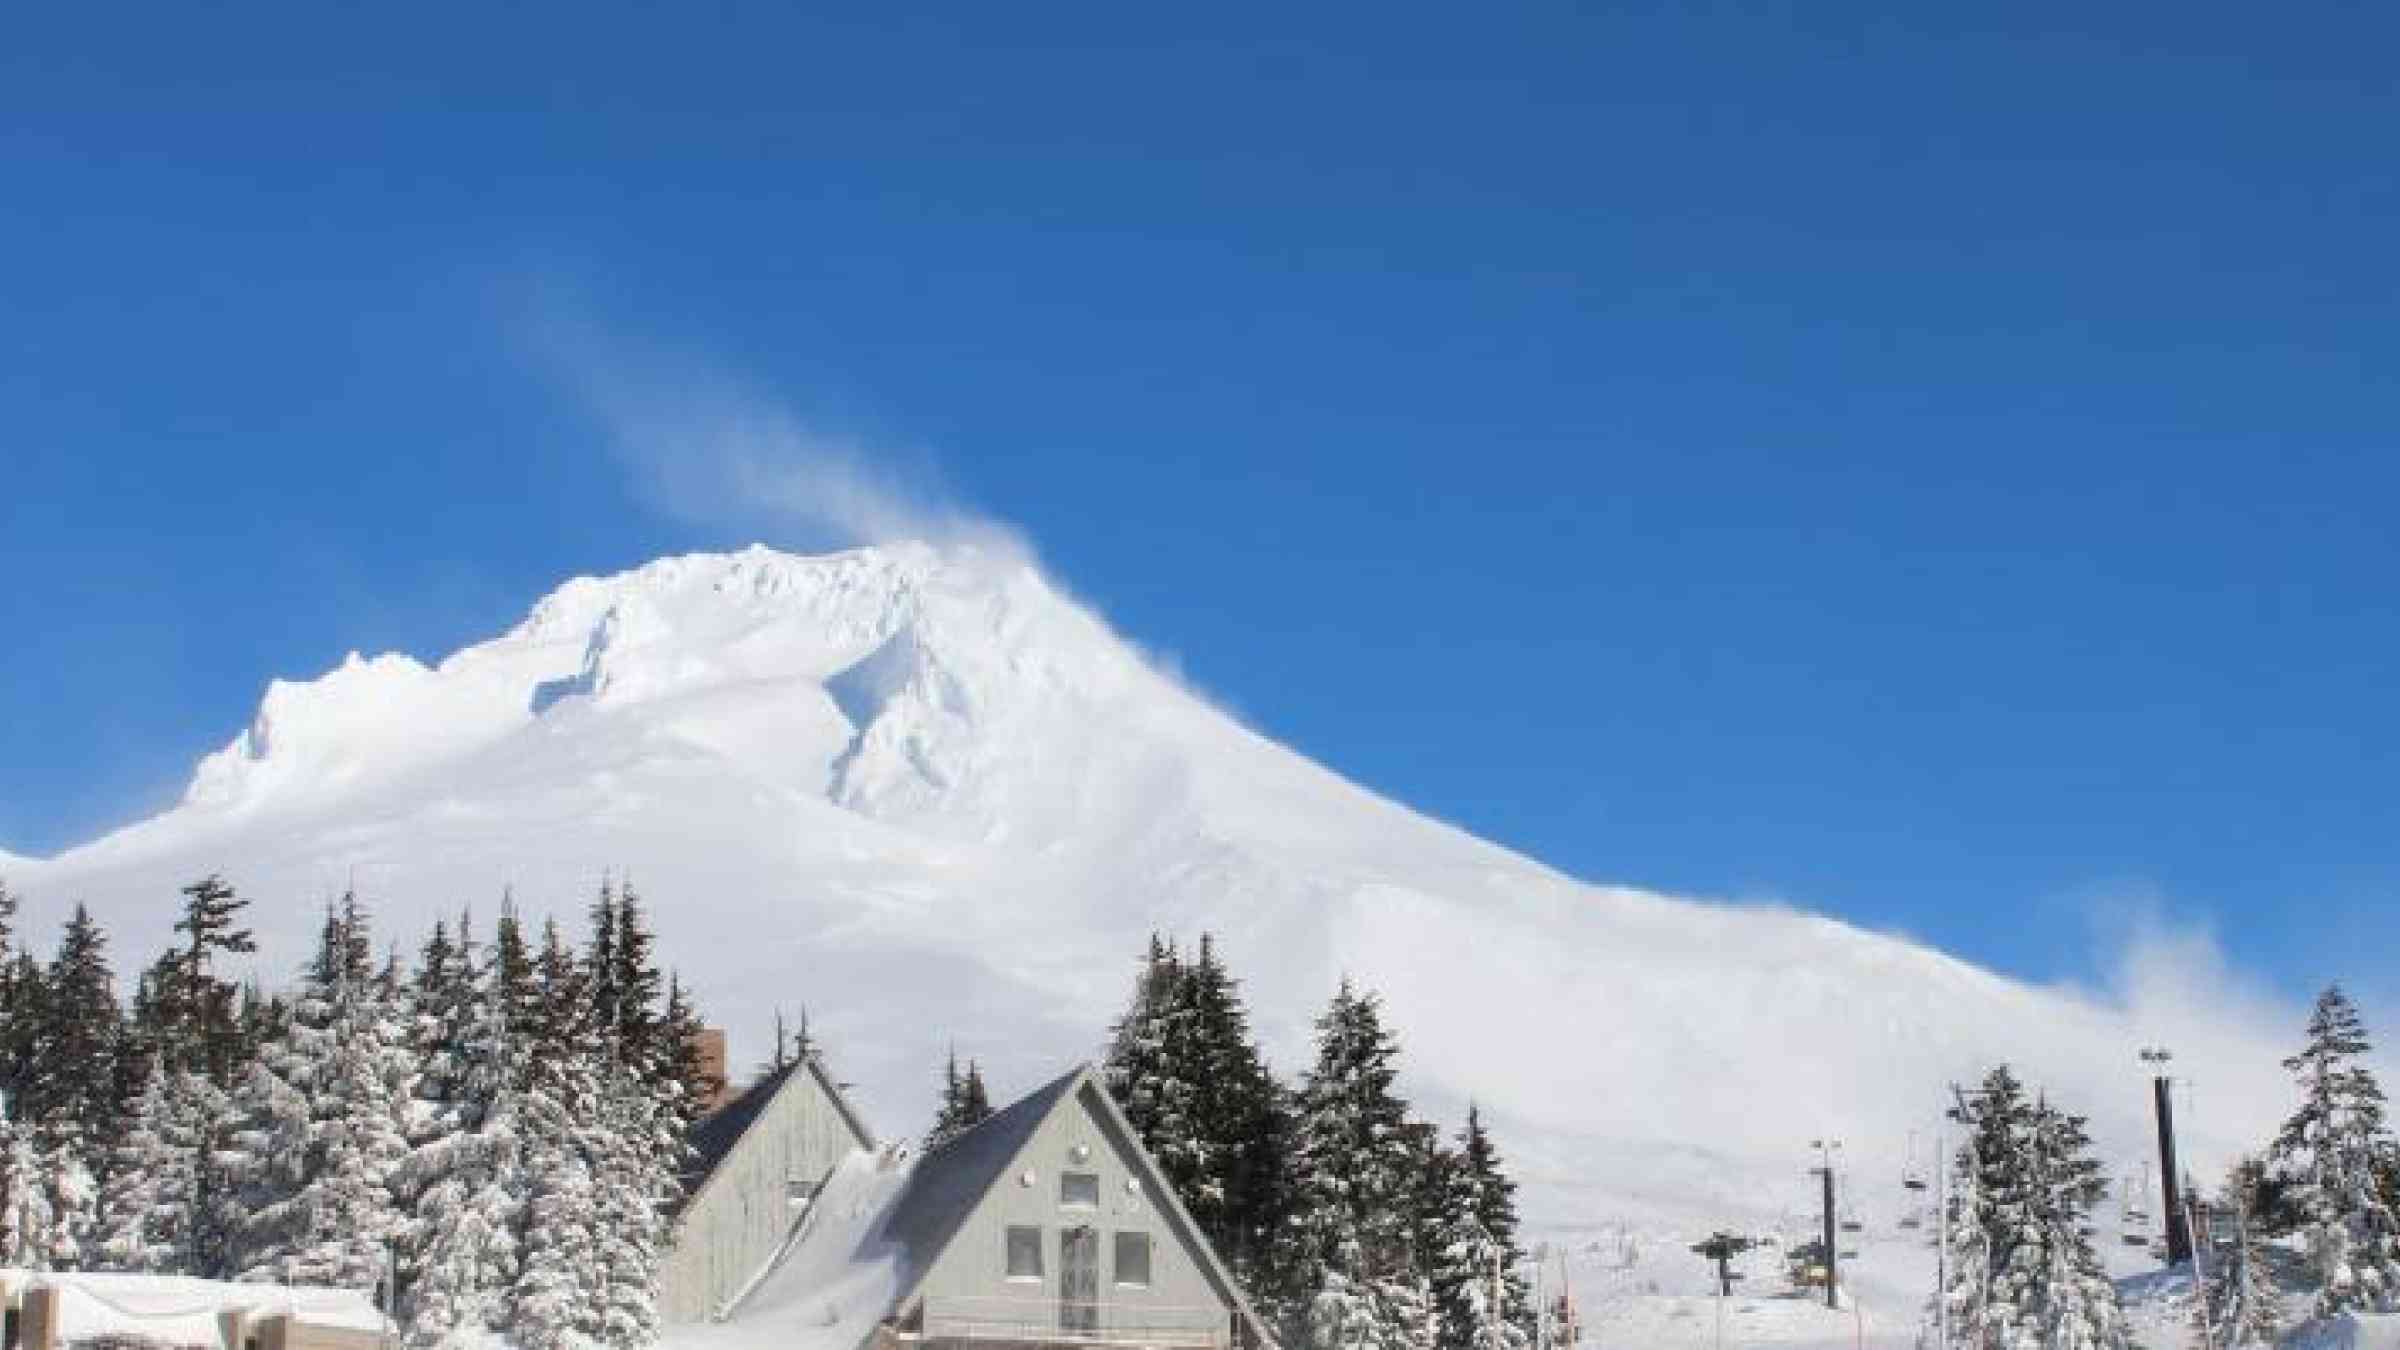 Wind rearranges the early season snowpack on Mount Hood. Source: USDA NRCS/Spencer Miller, CC BY 2.0